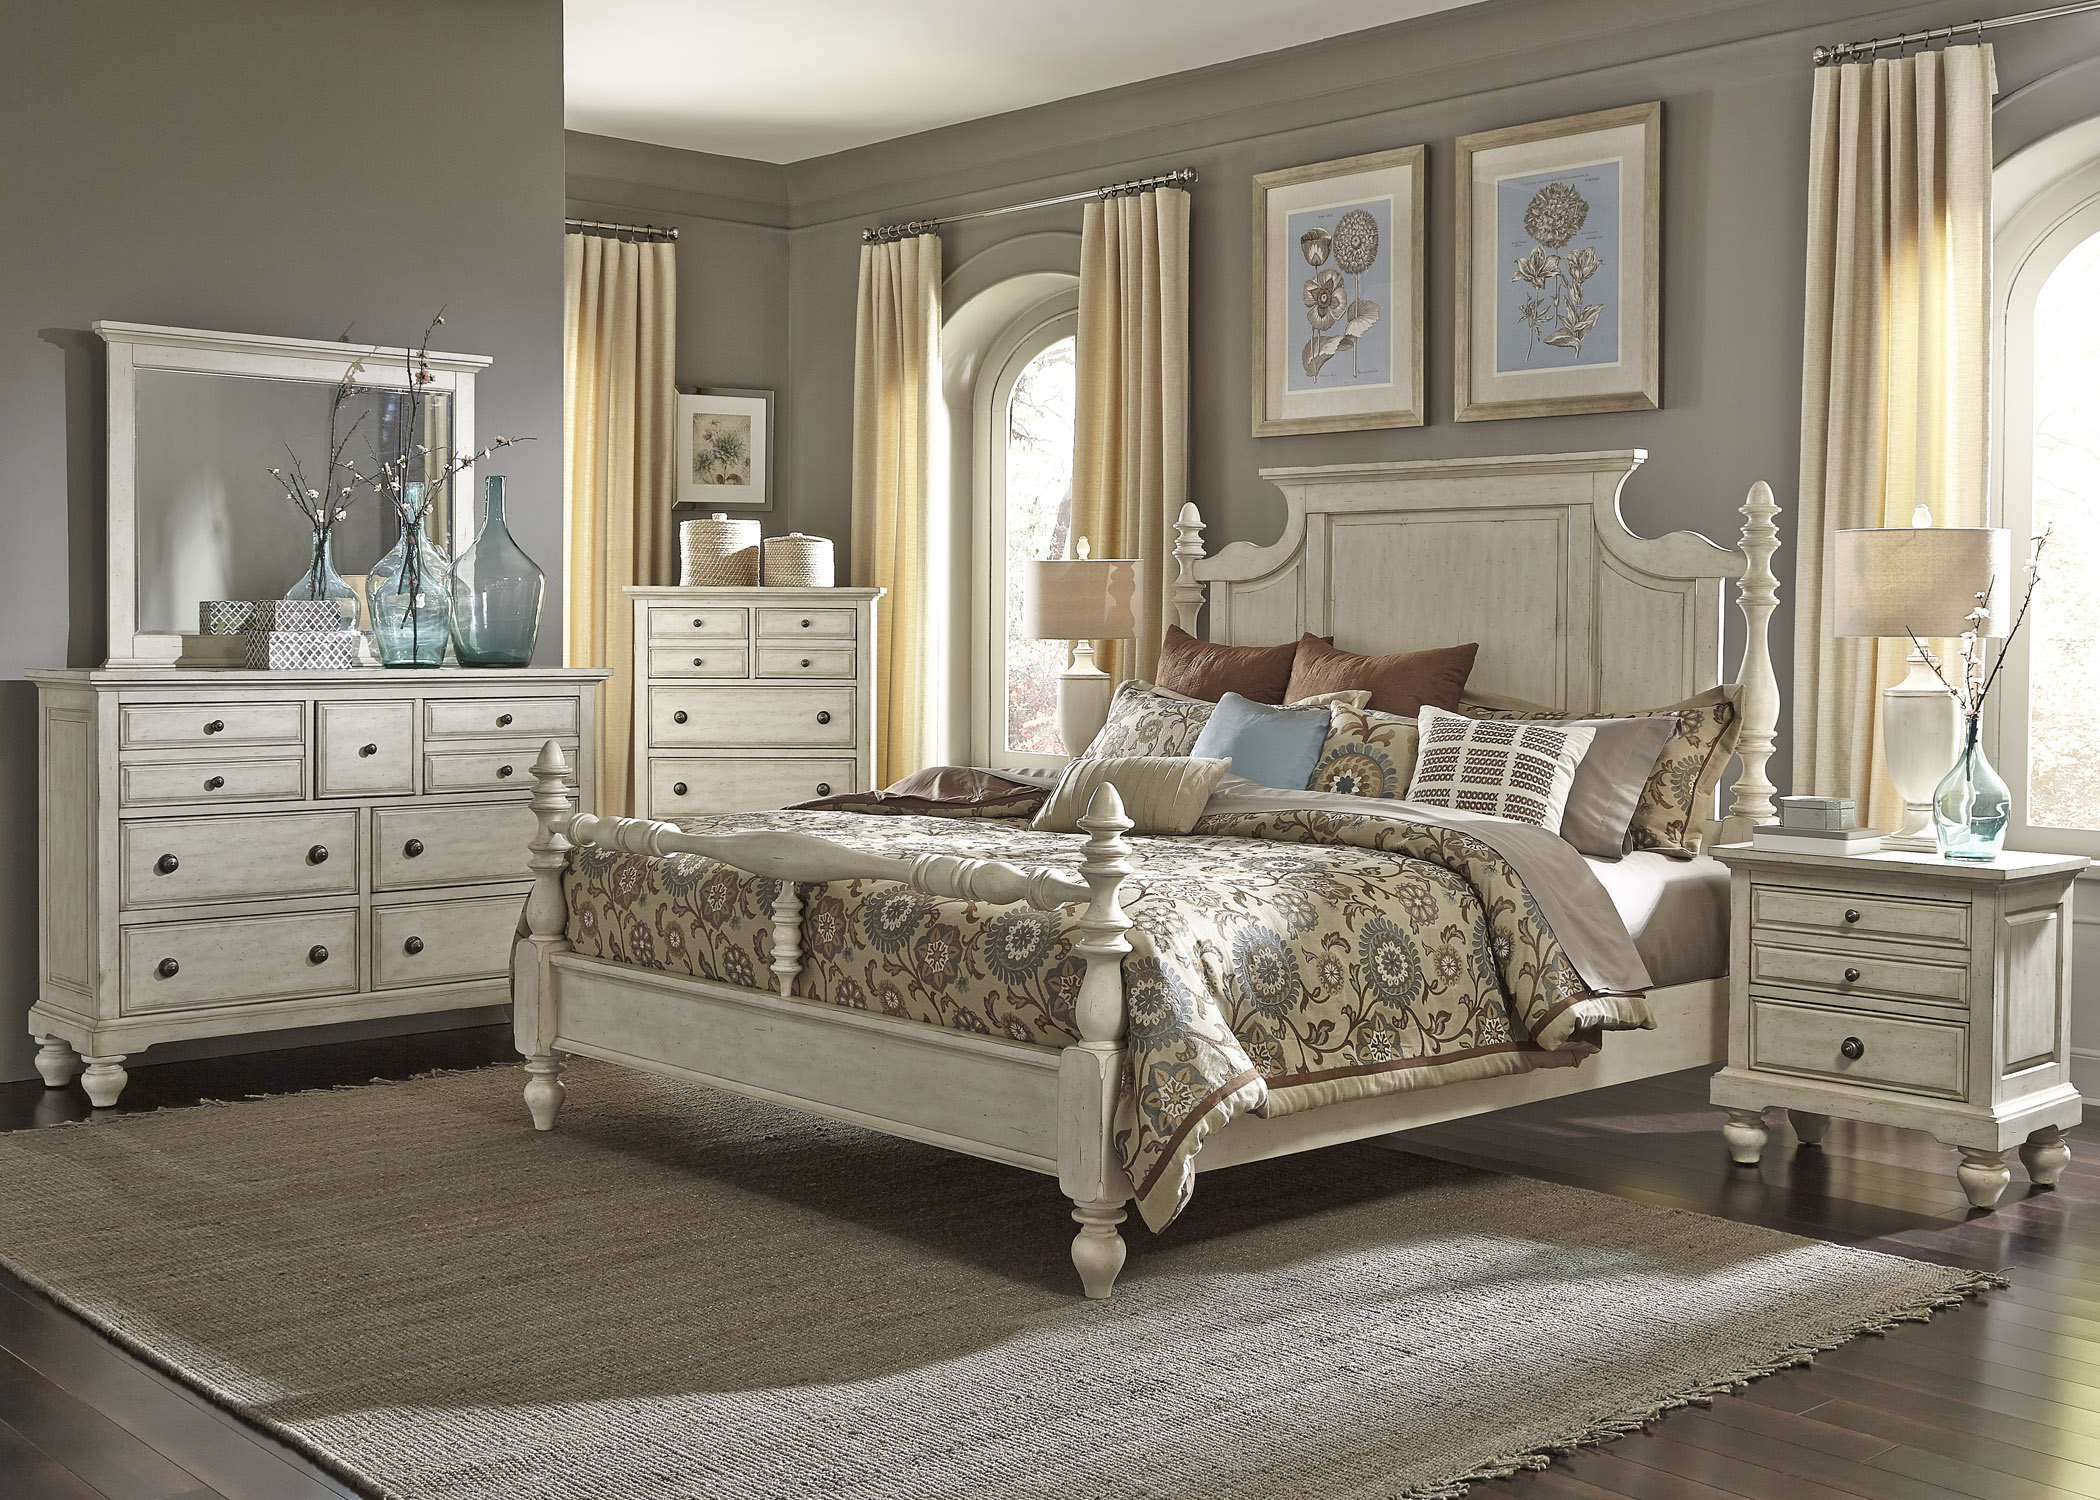 Liberty Furniture High Country Bedroom King Poster Bed, Dresser, Mirror, Chest and Night Stand Collection